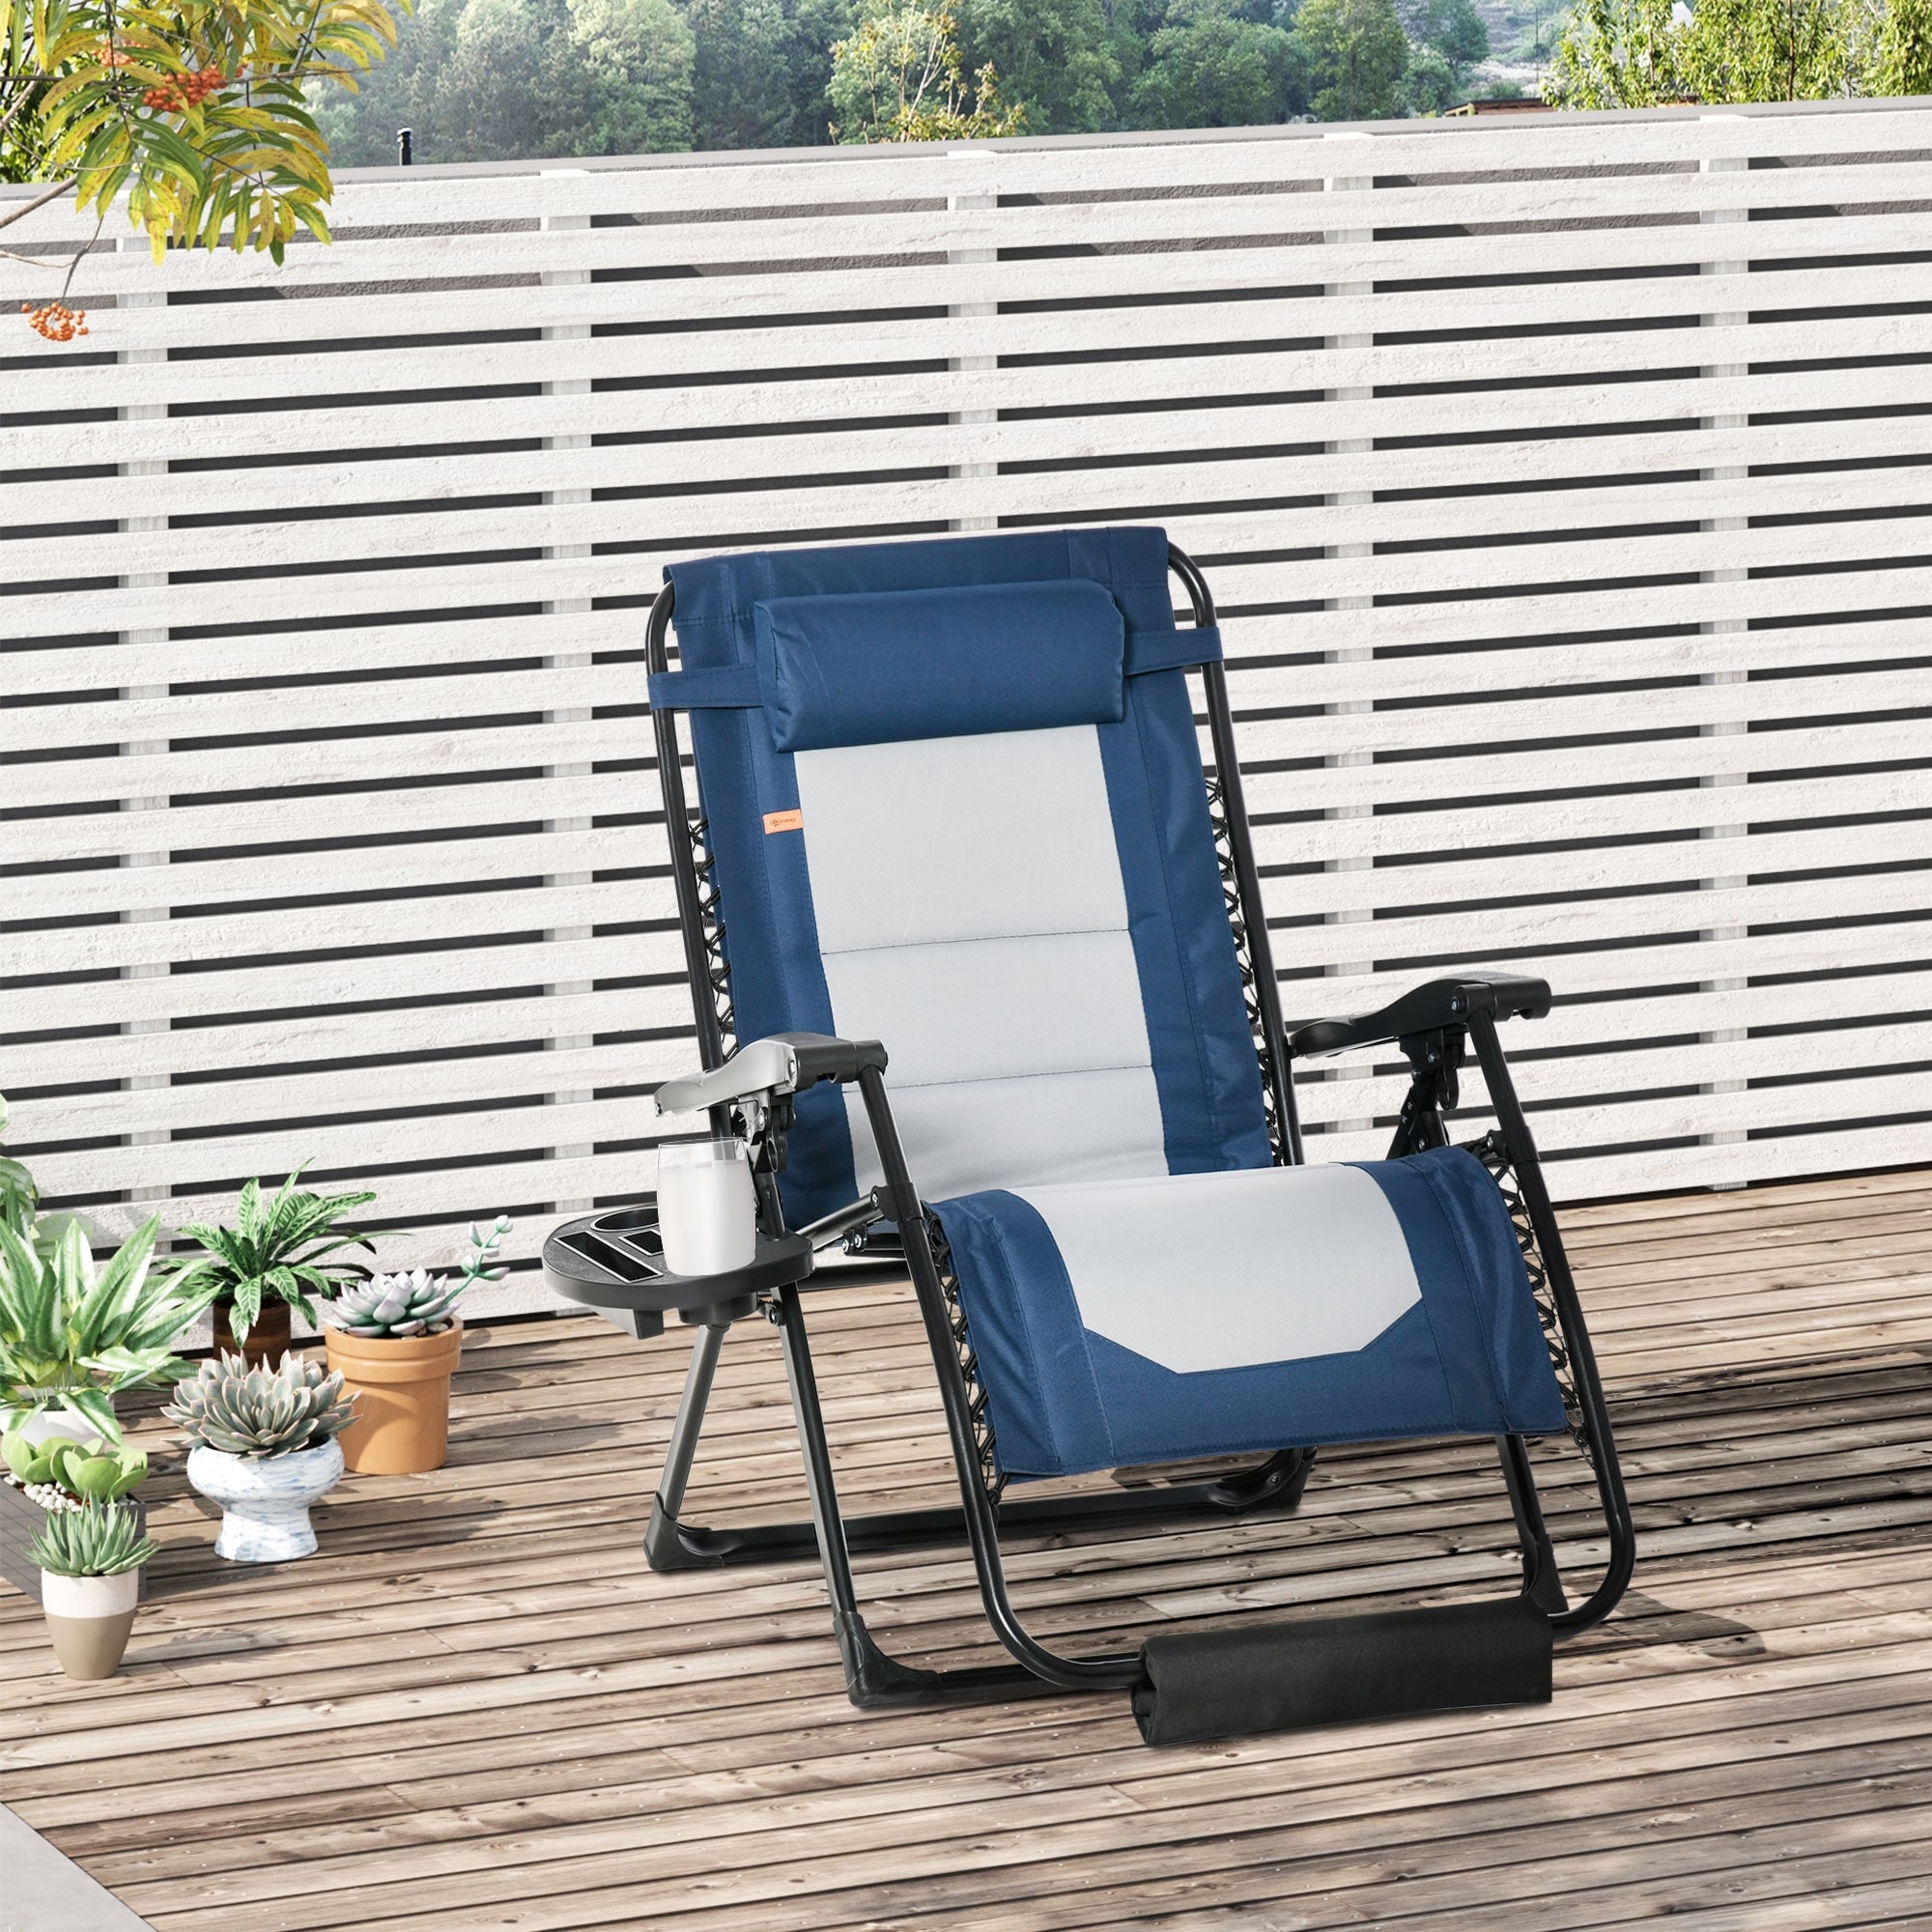 Outsunny Zero Gravity Lounger Chair  Folding Reclining Patio Chair With Cup Holder  Headrest  Footrest  For Poolside  Camping